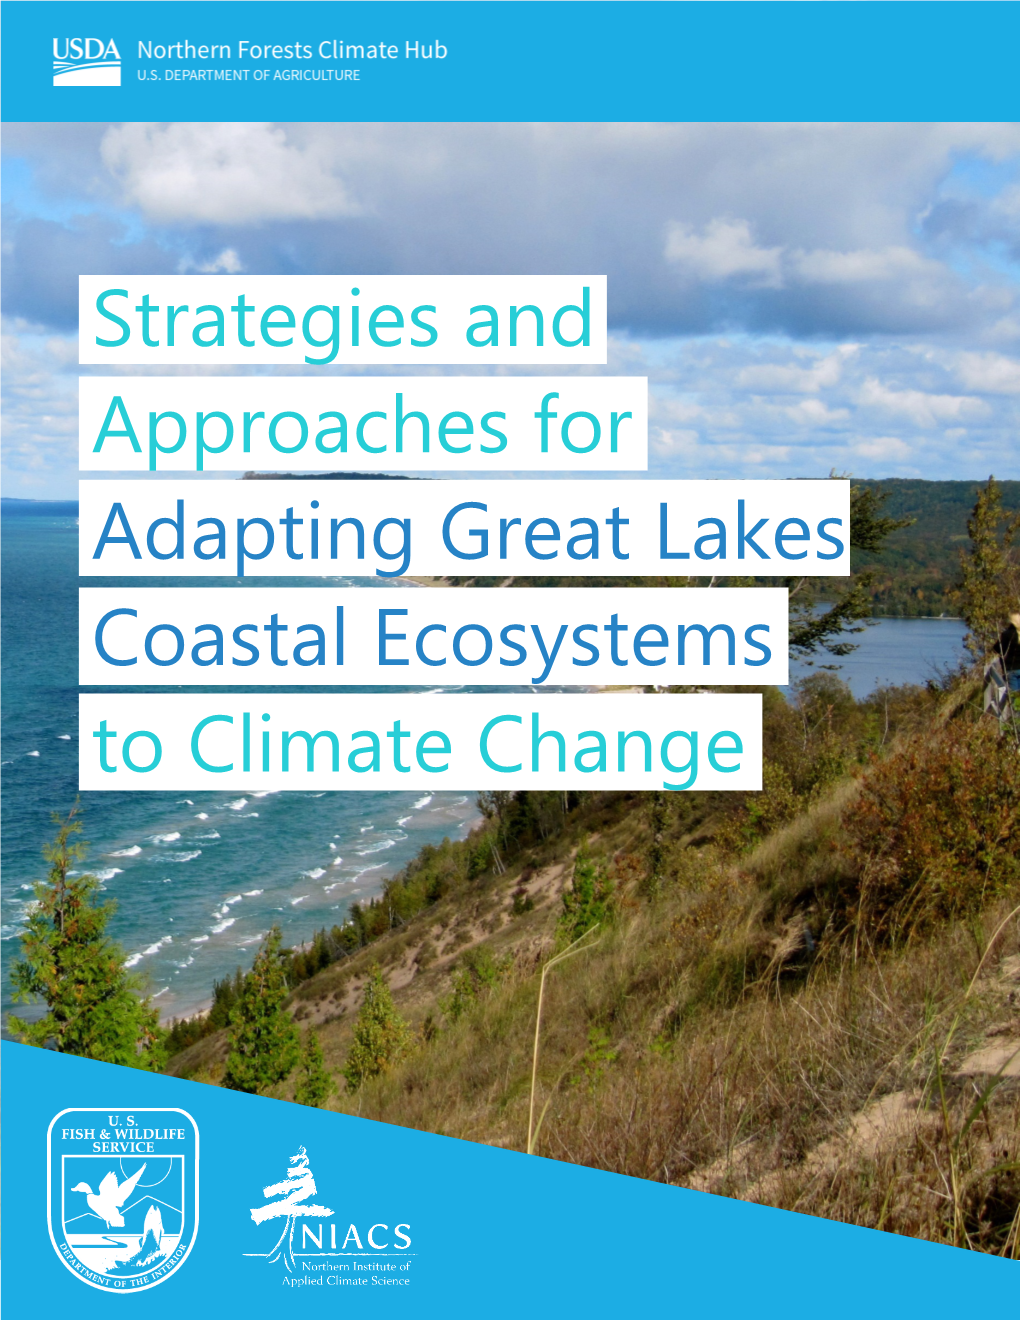 Strategies and Approaches for Adapting Great Lakes Coastal Ecosystems to Climate Change DRAFT May 27, 2021 This DRAFT REPORT Is Available for Practitioner Use